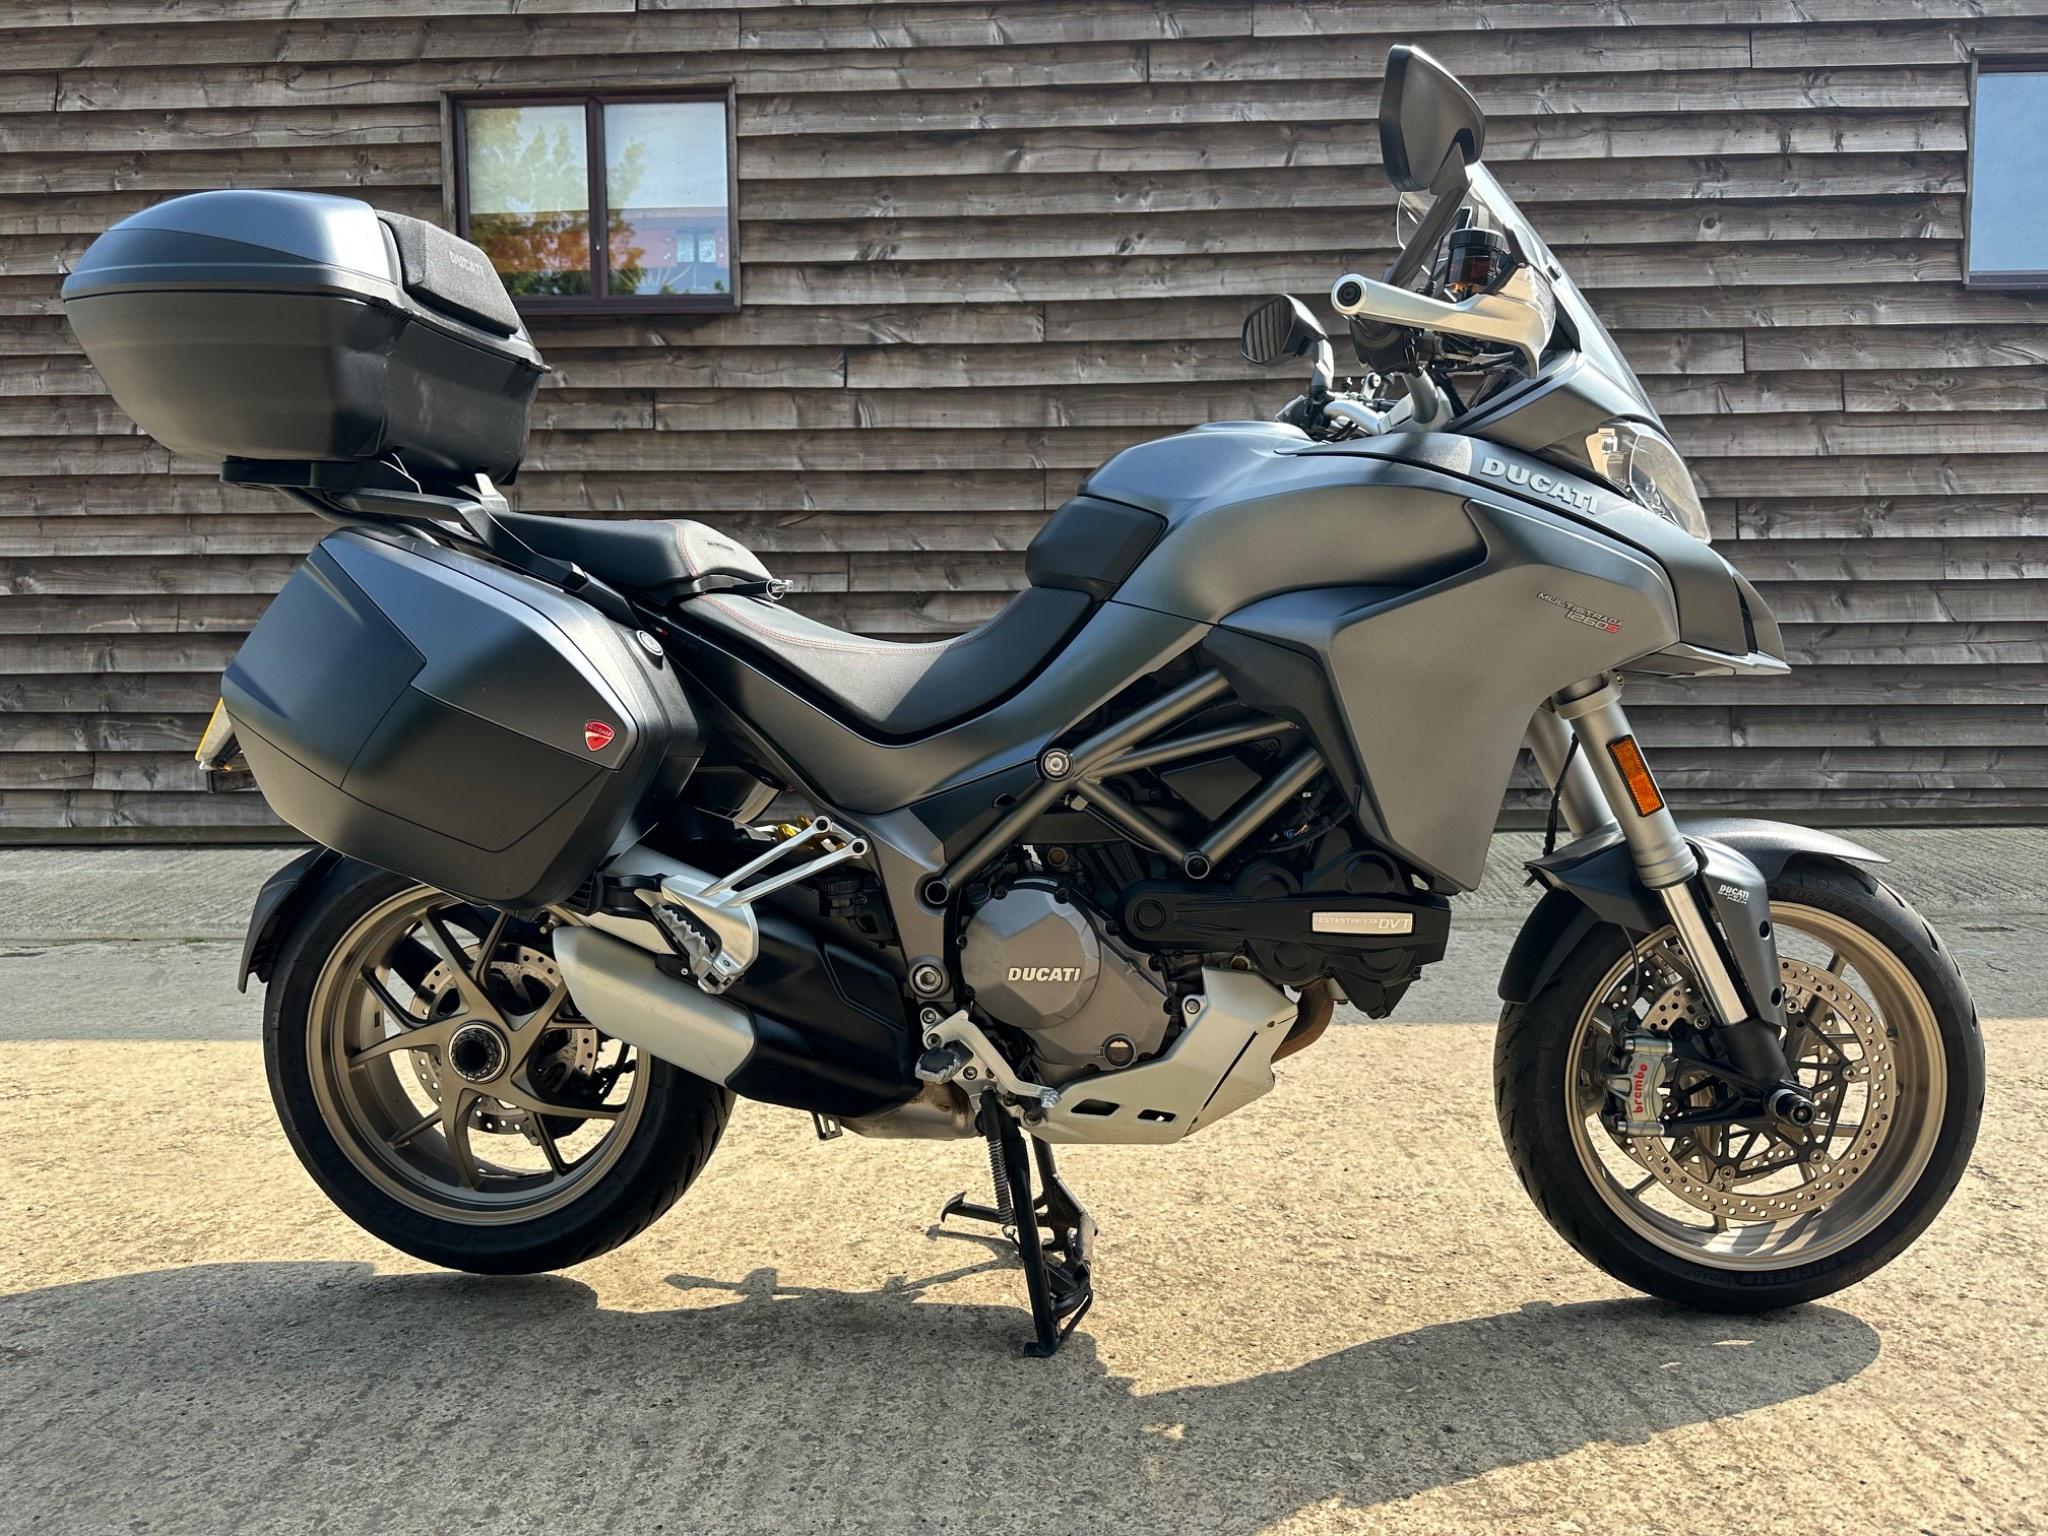 2018 Ducati Multistrada 1260 1260 S ABS (Grey or White Color) From £182.78 per month 